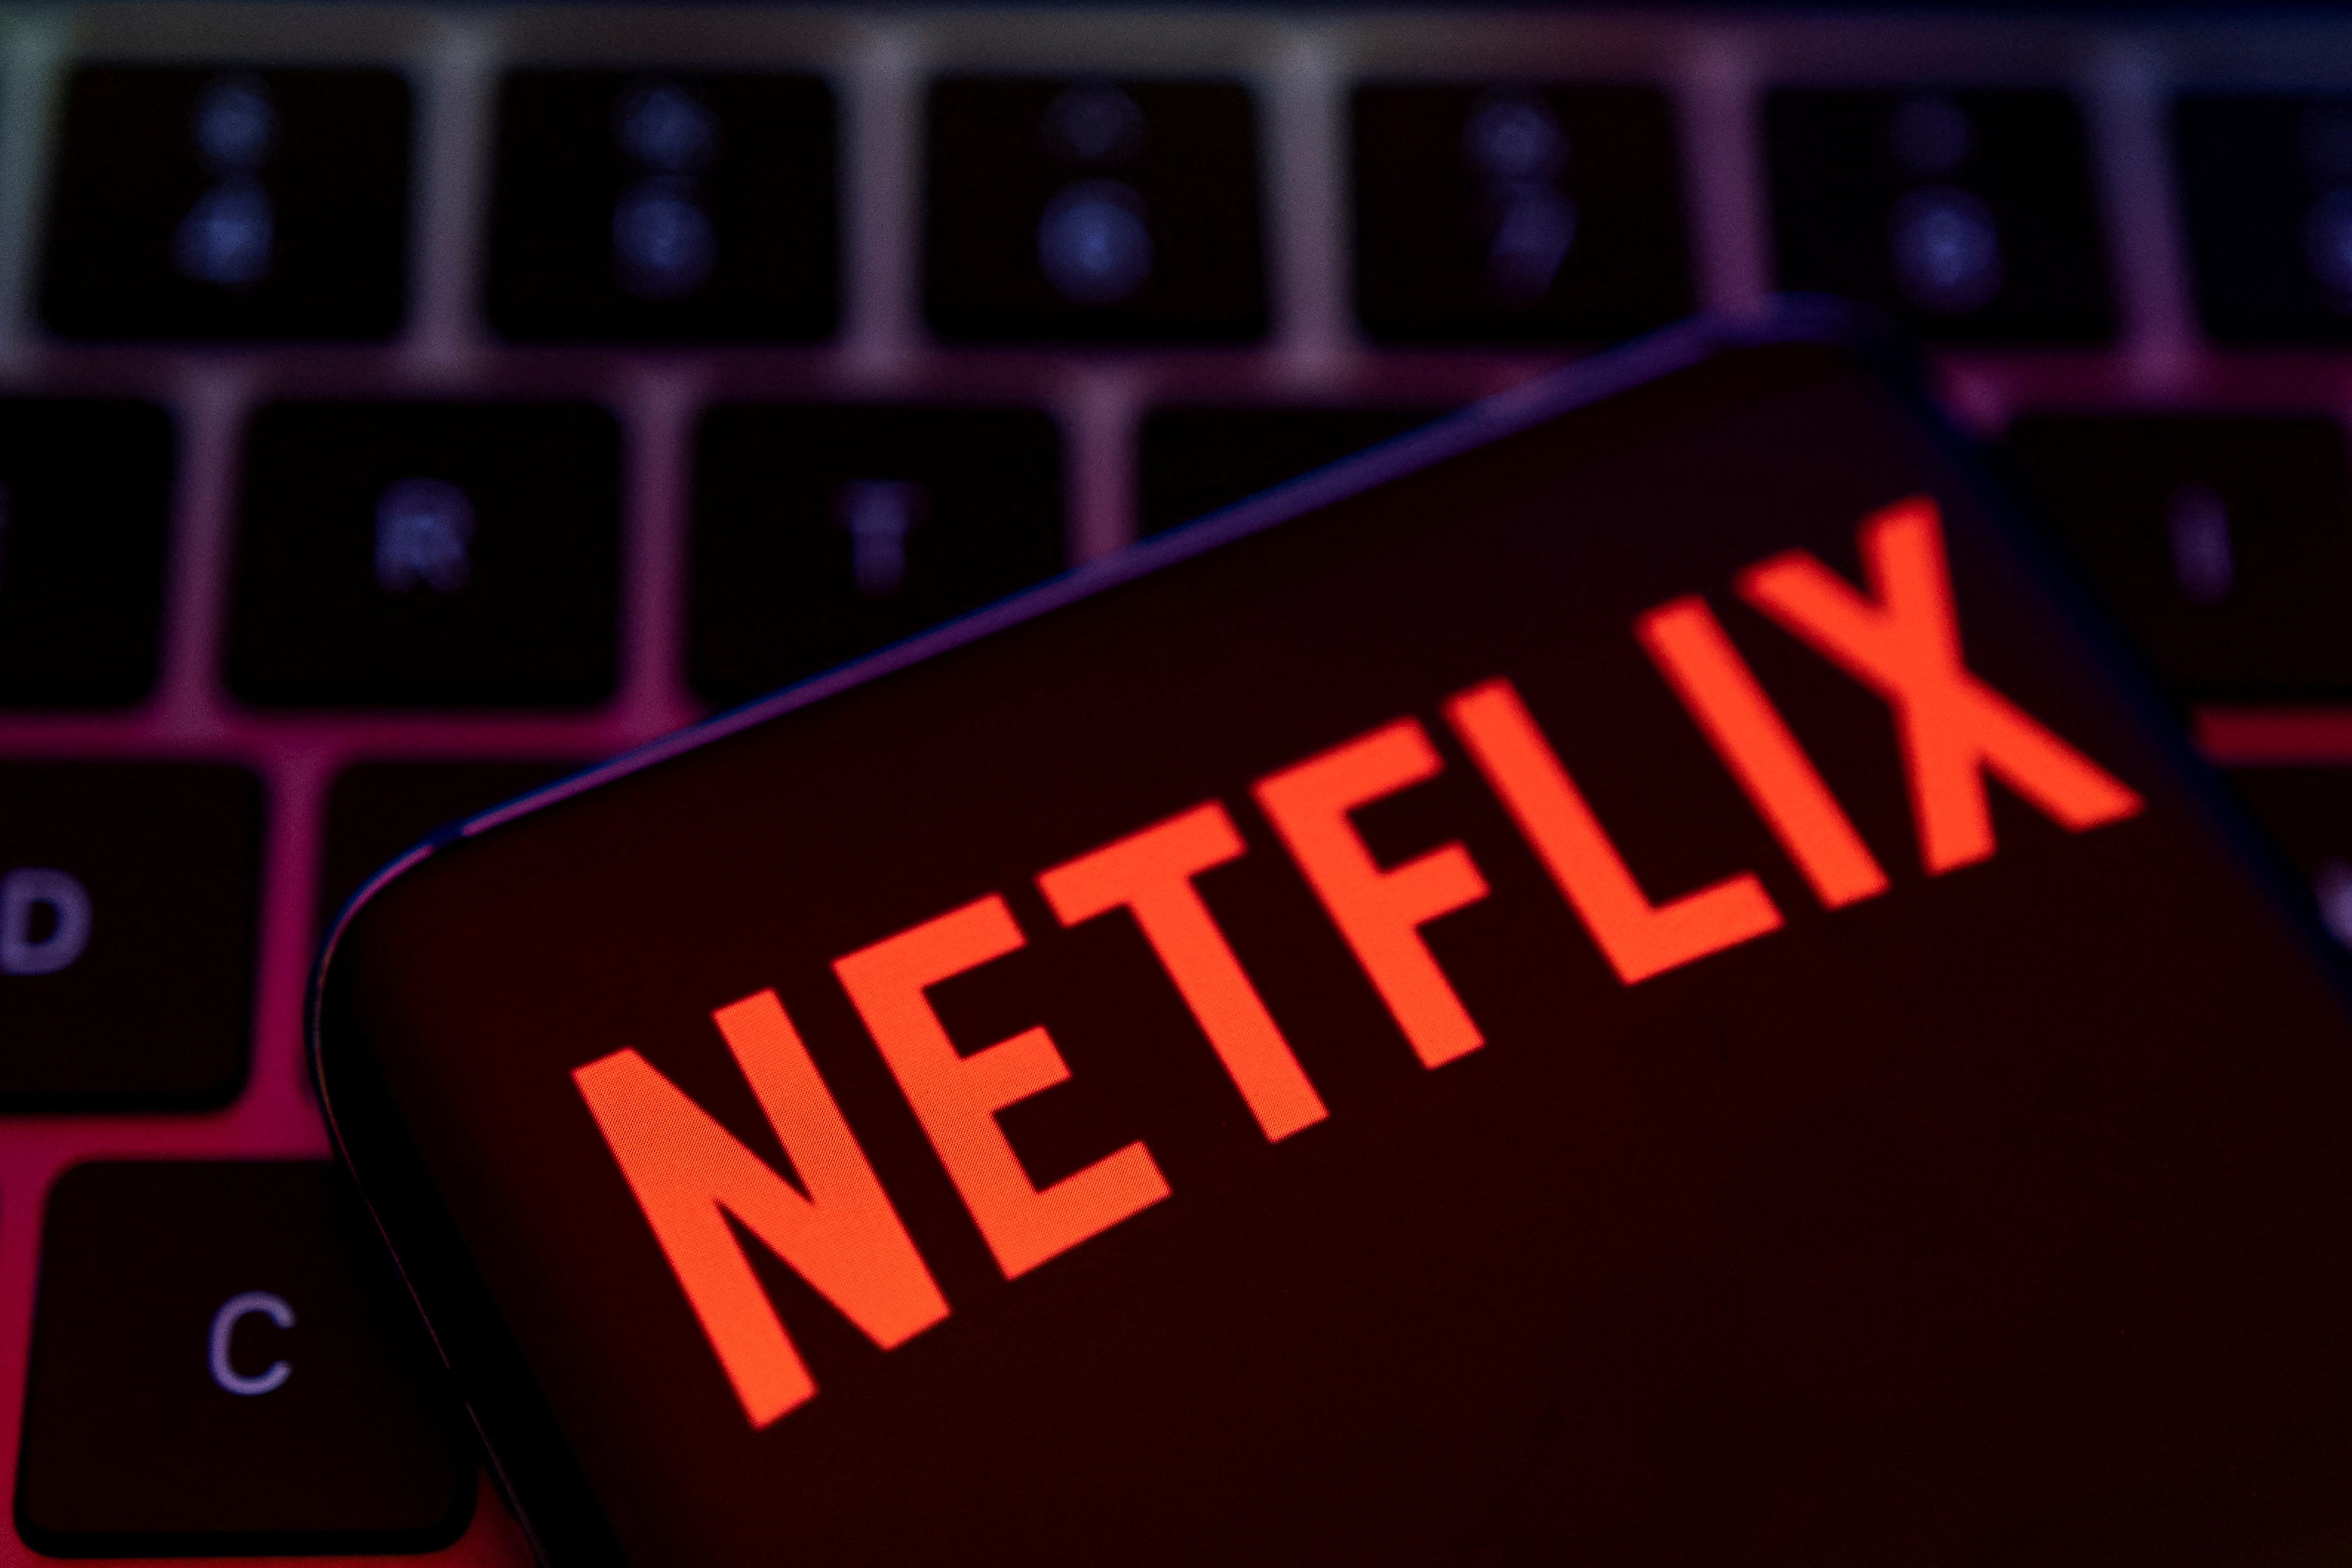 How Netflix's password-sharing crackdown is likely to work